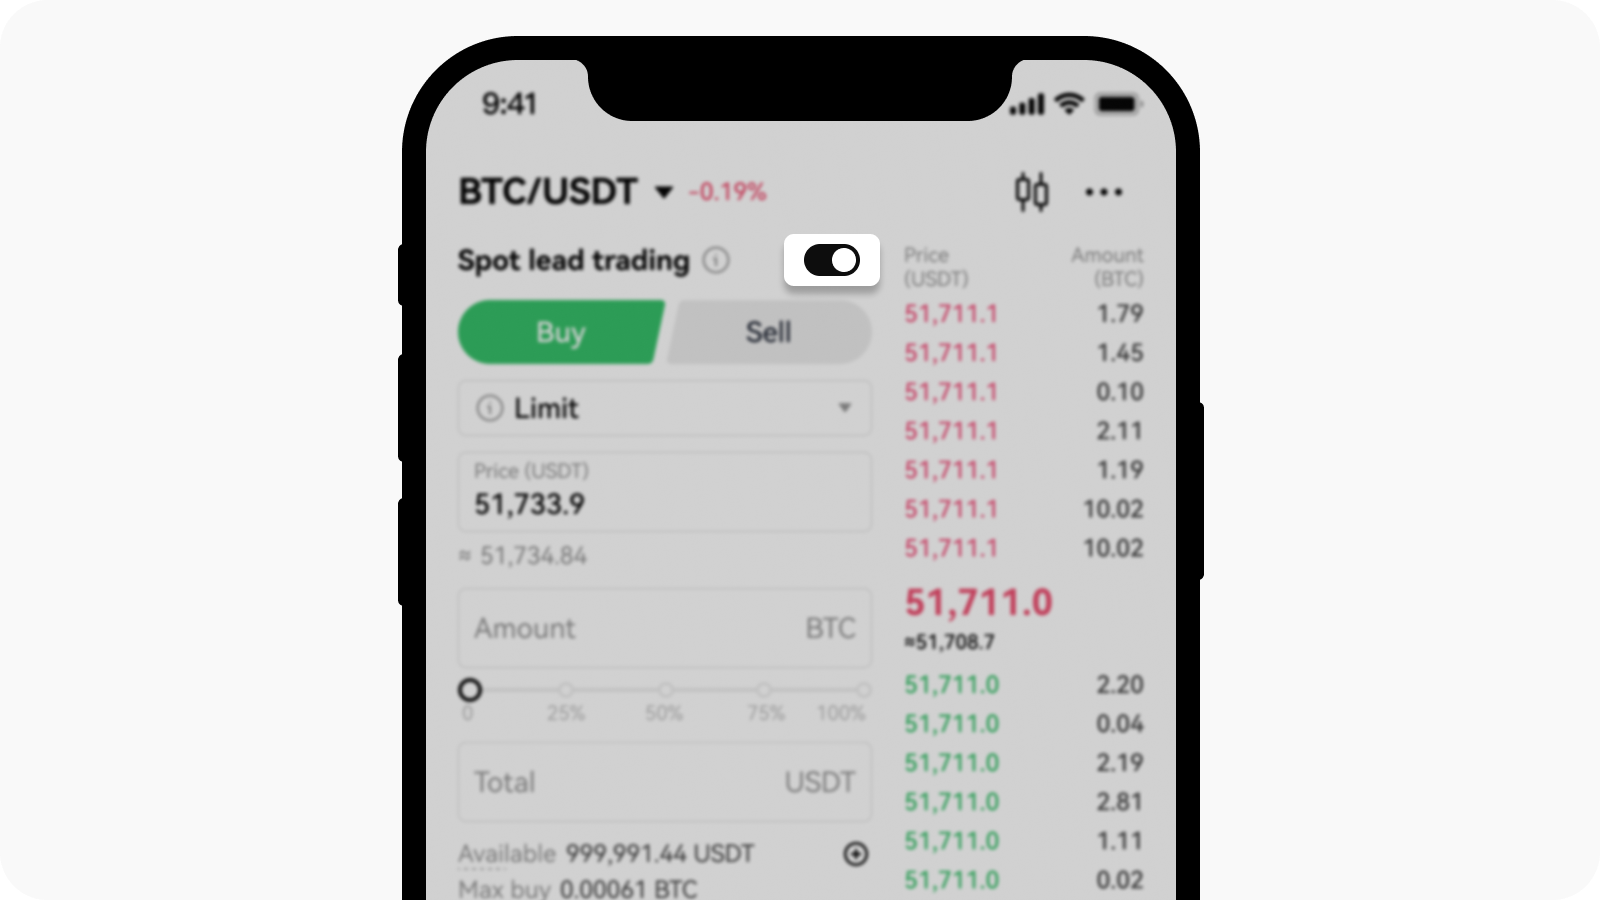 CT-app-spot copy trading-toggle on lead trade